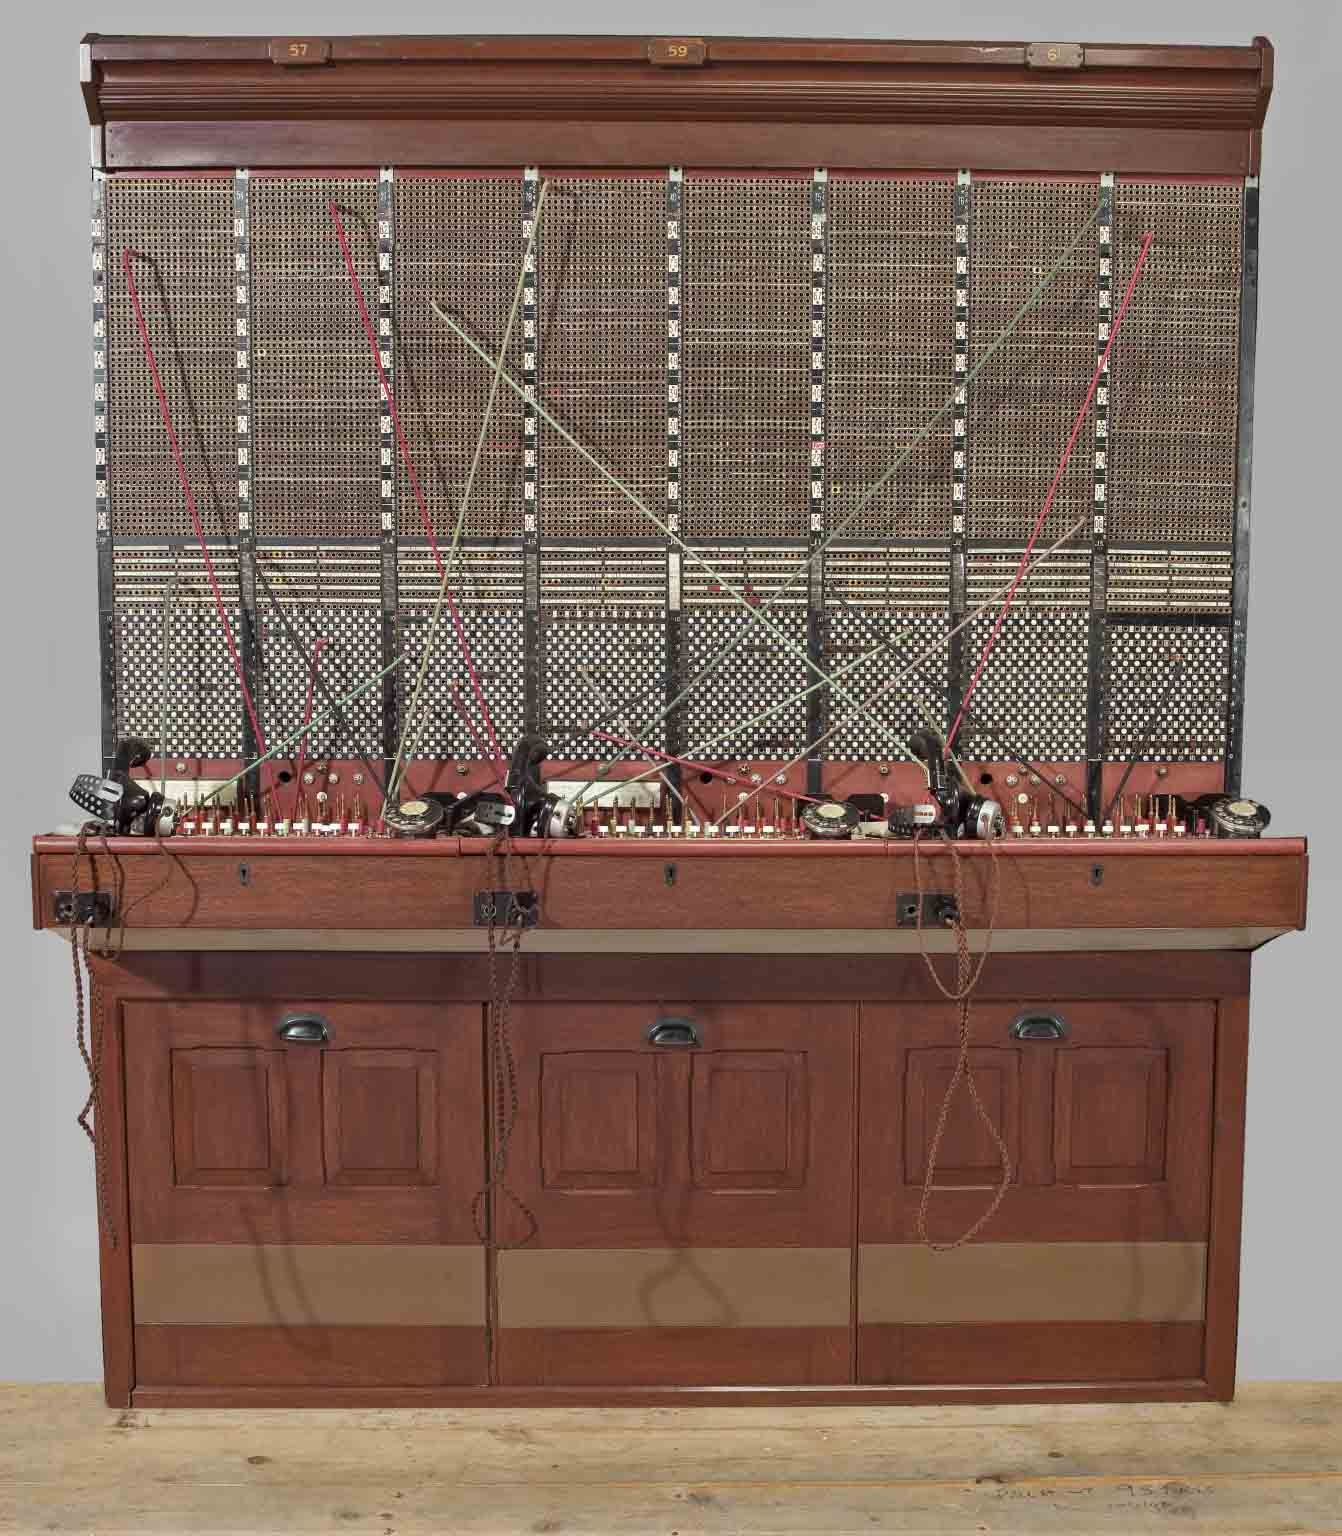 A switchboard from the Enfield Exchange, which will go on display in the Science Musuem's new Information Age gallery. Image credit: Science Museum